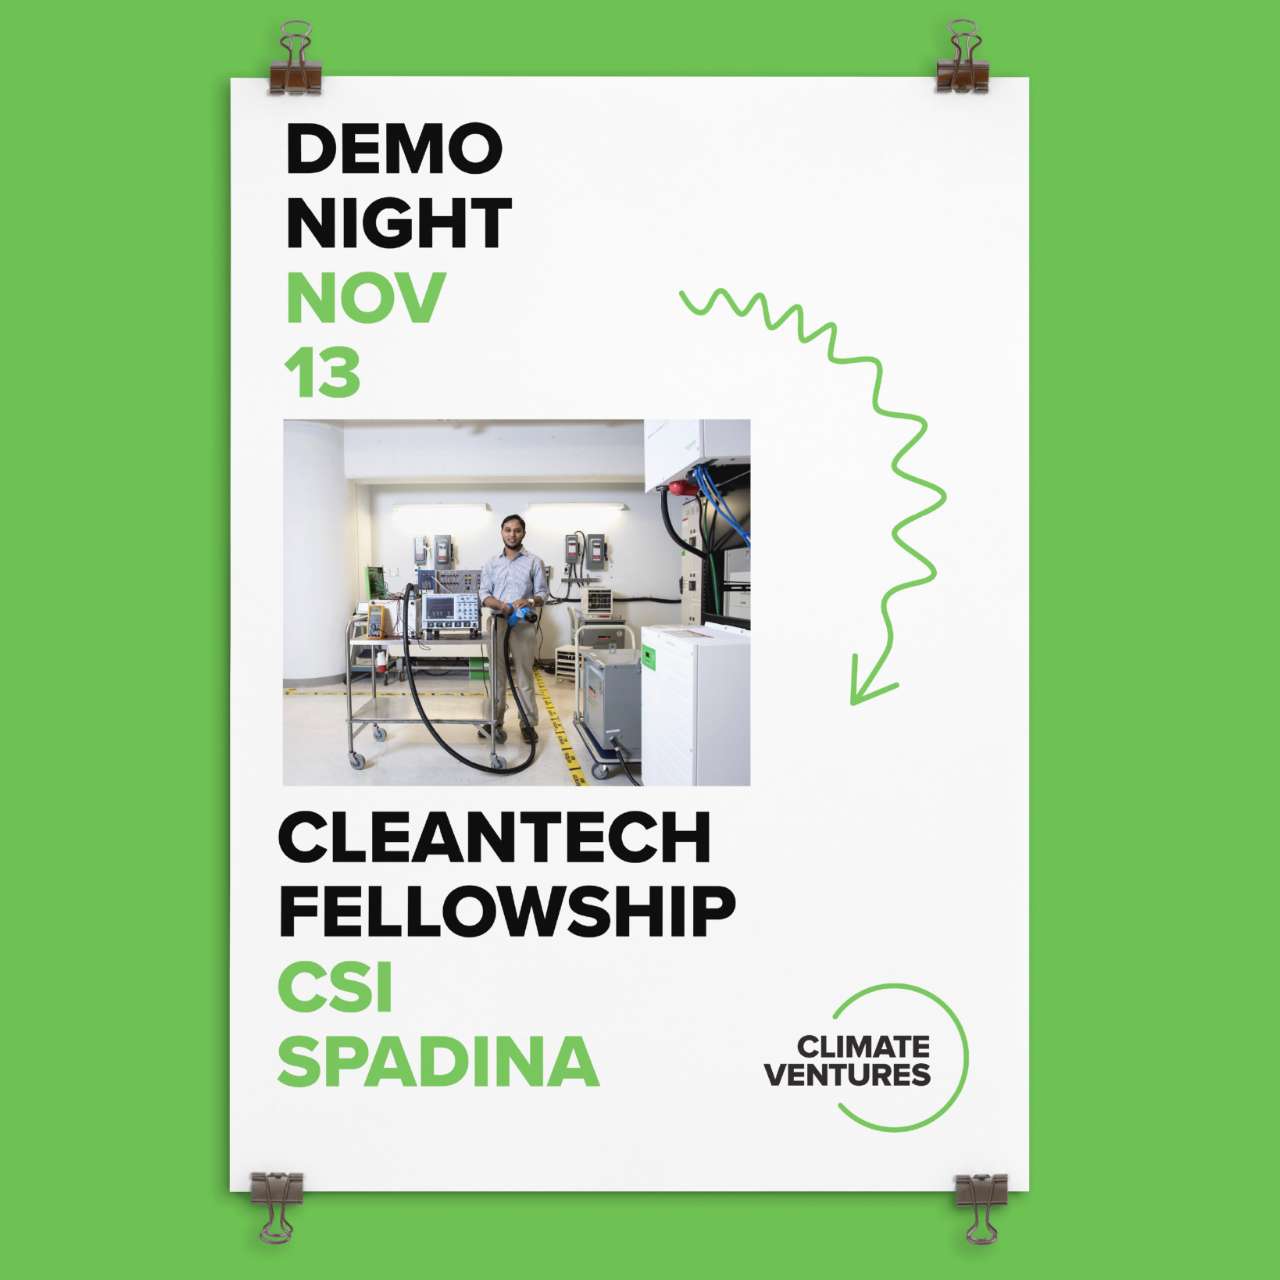 A poster for Climate Ventures demo night